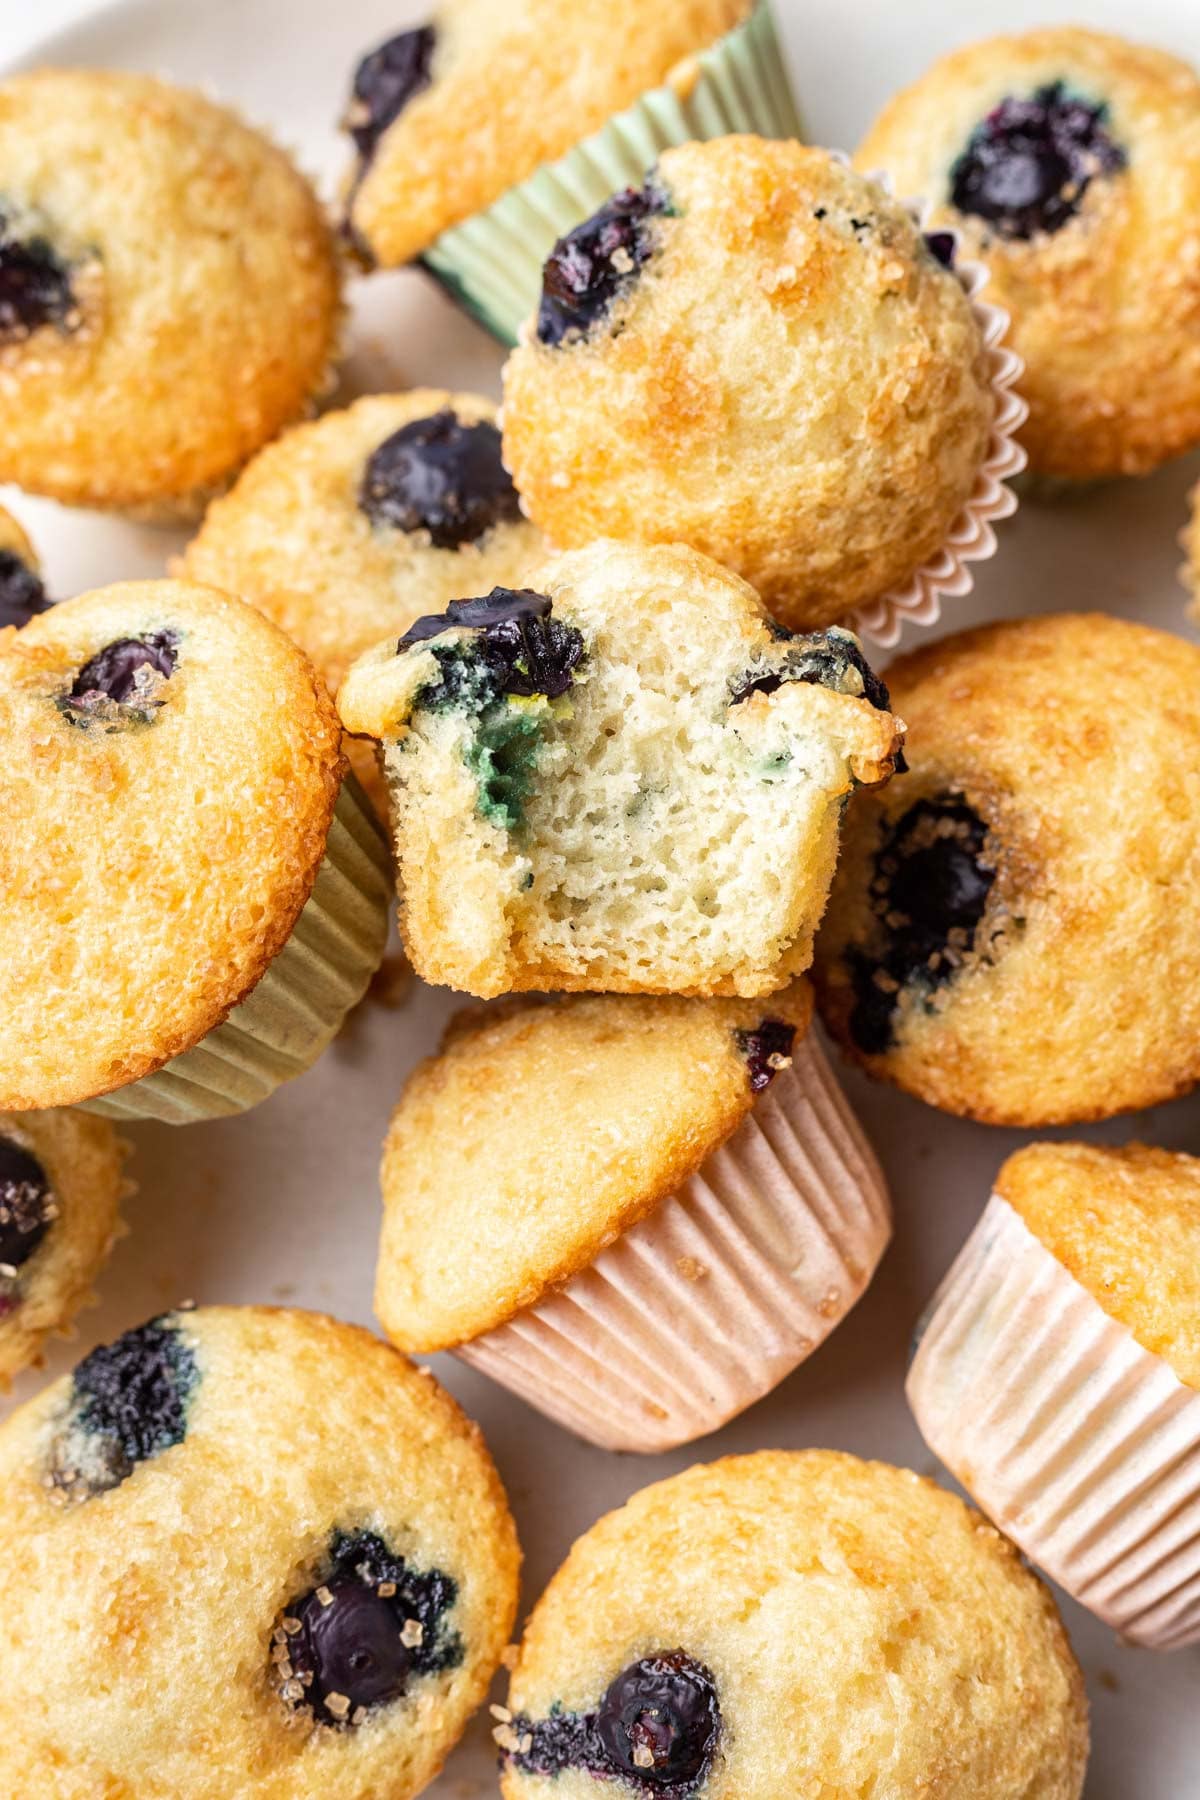 A plate of mini blueberry muffins with a bite missing from one muffin.